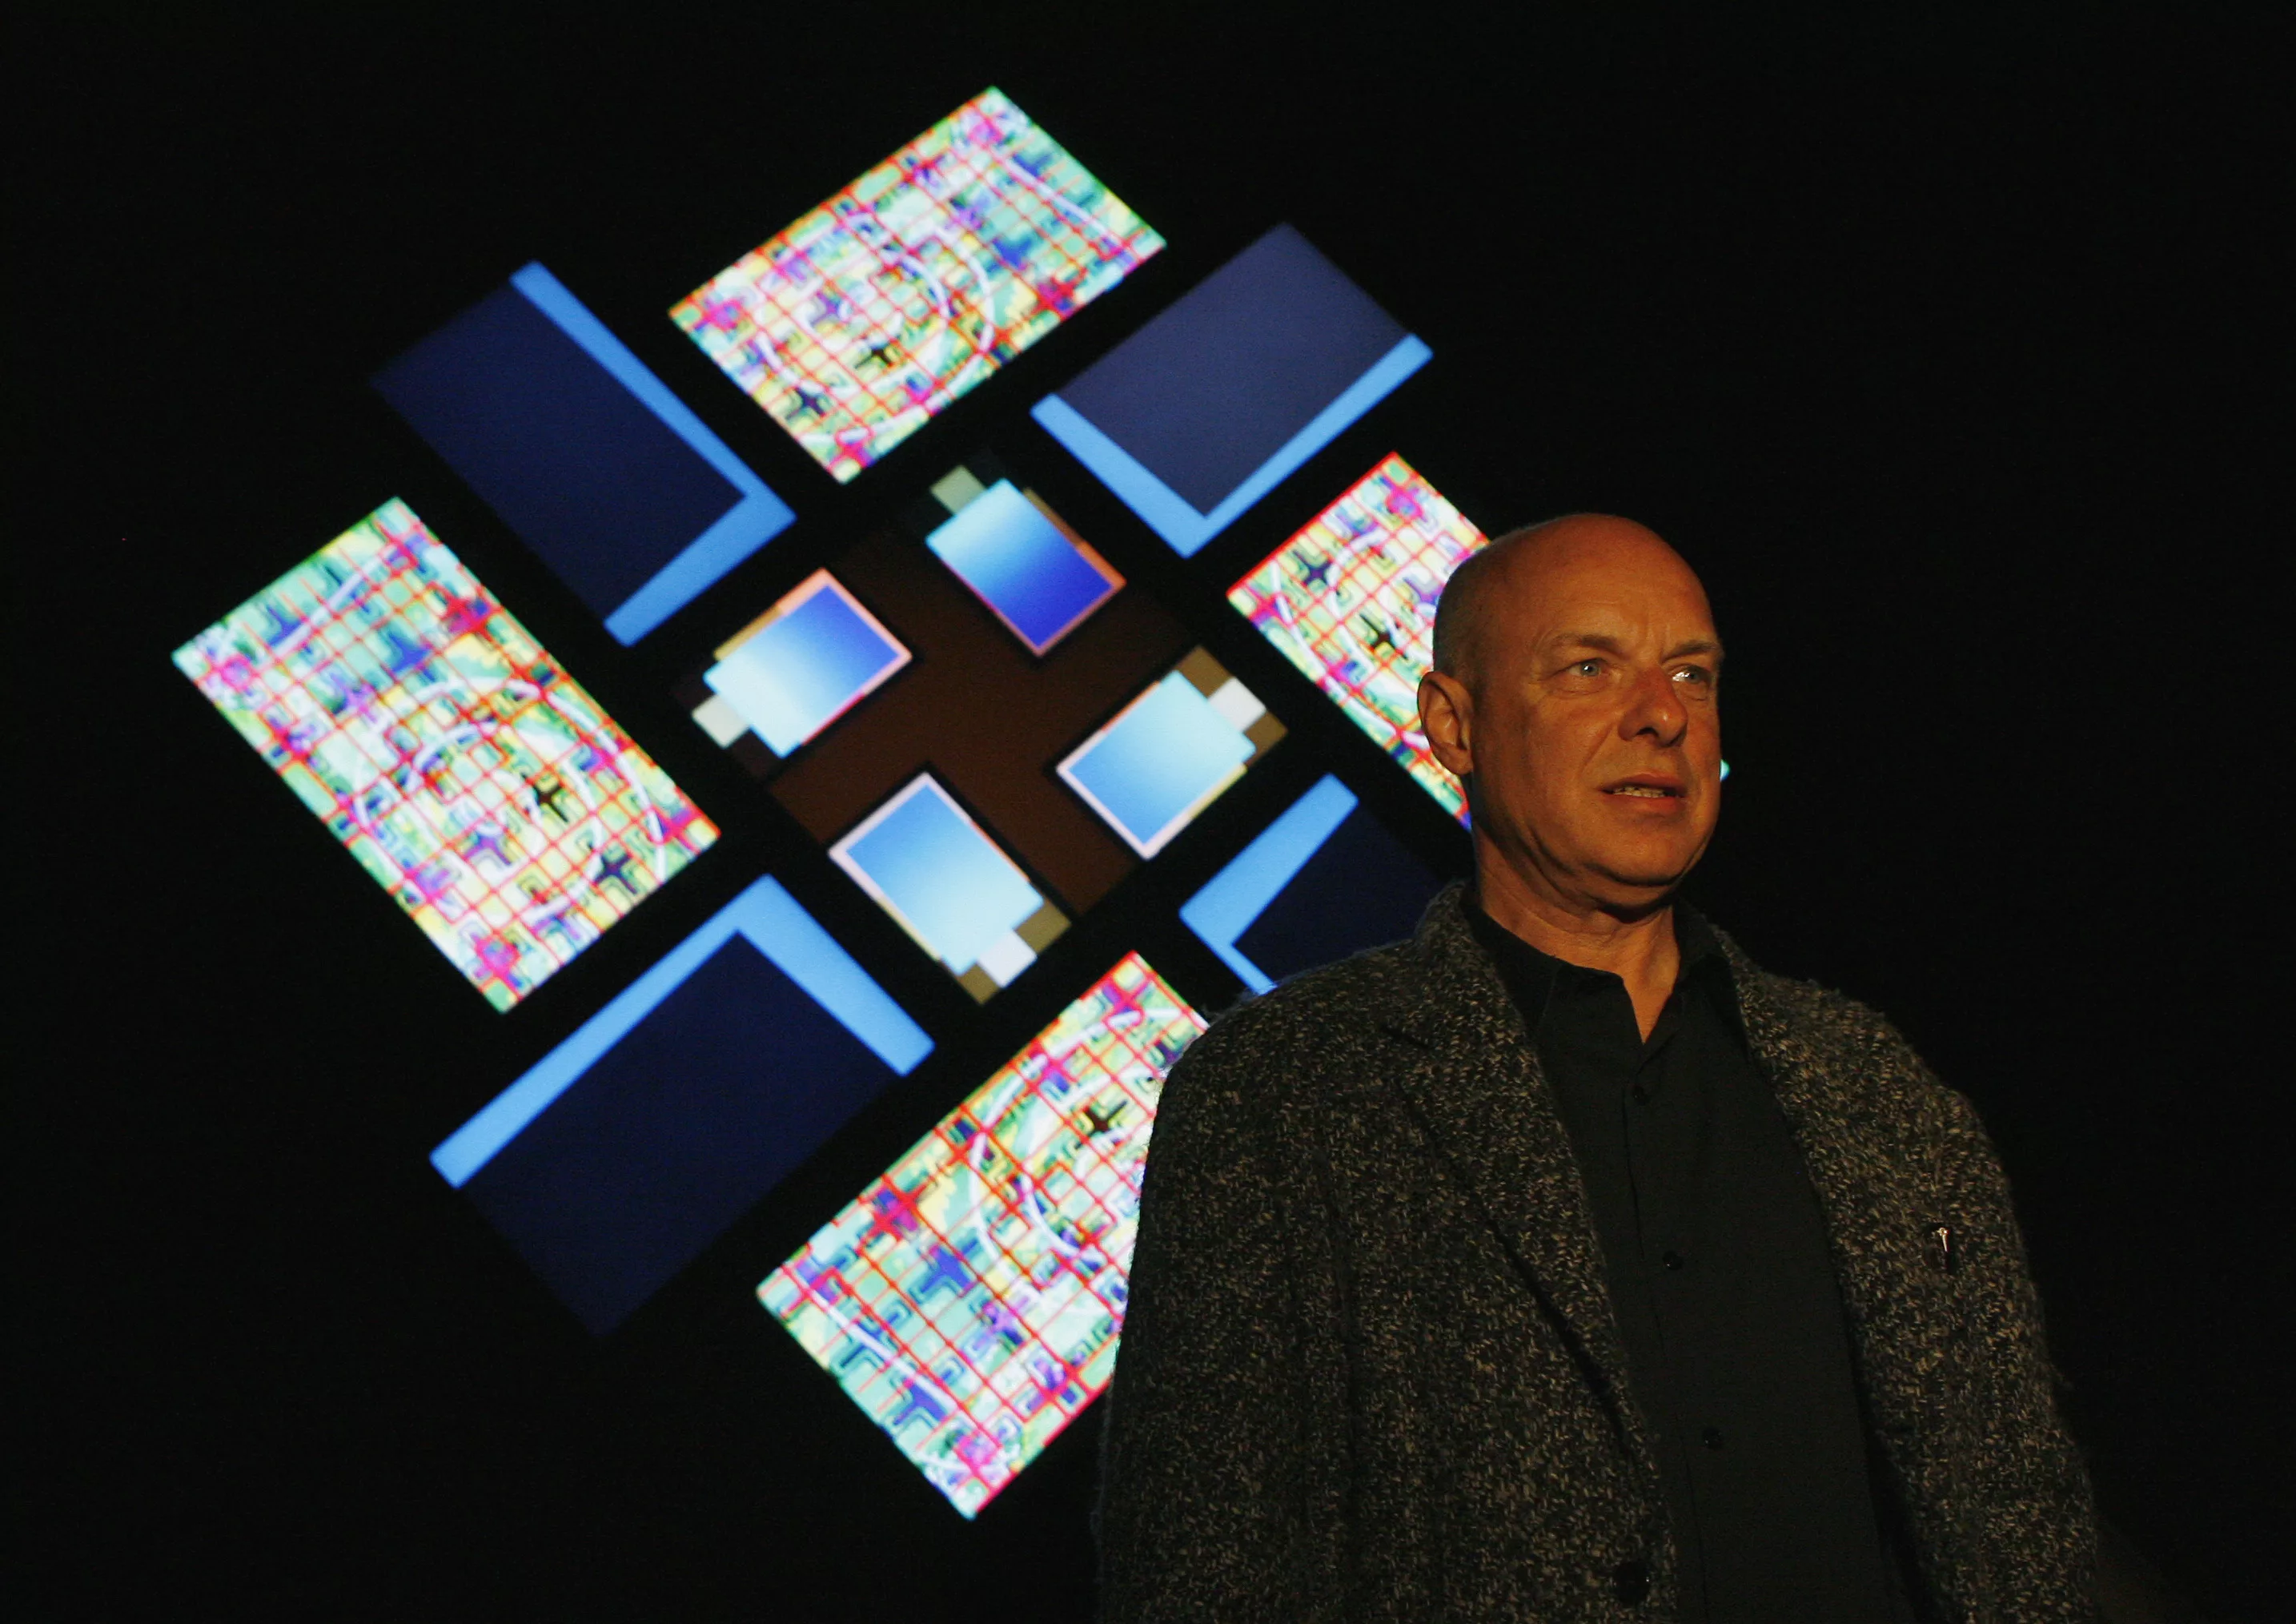 british-contemporary-artist-eno-poses-next-to-his-work-77-million-paintings-as-part-of-the-sydney-vivid-festival-at-sydney-opera-house